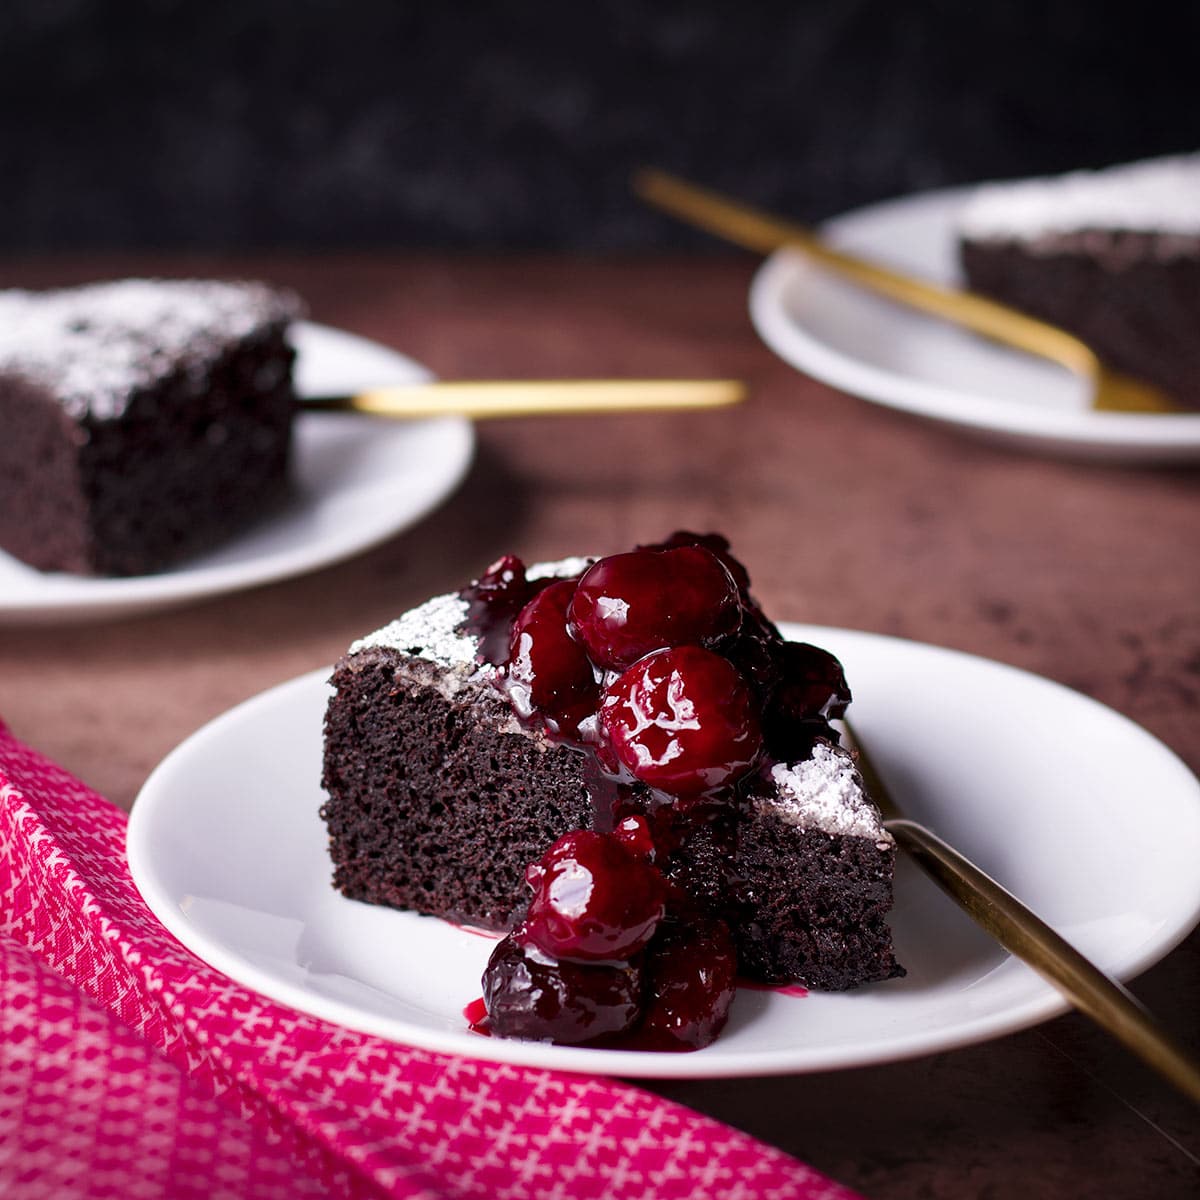 A slice of Dutch oven chocolate cake smothered in cherry sauce.